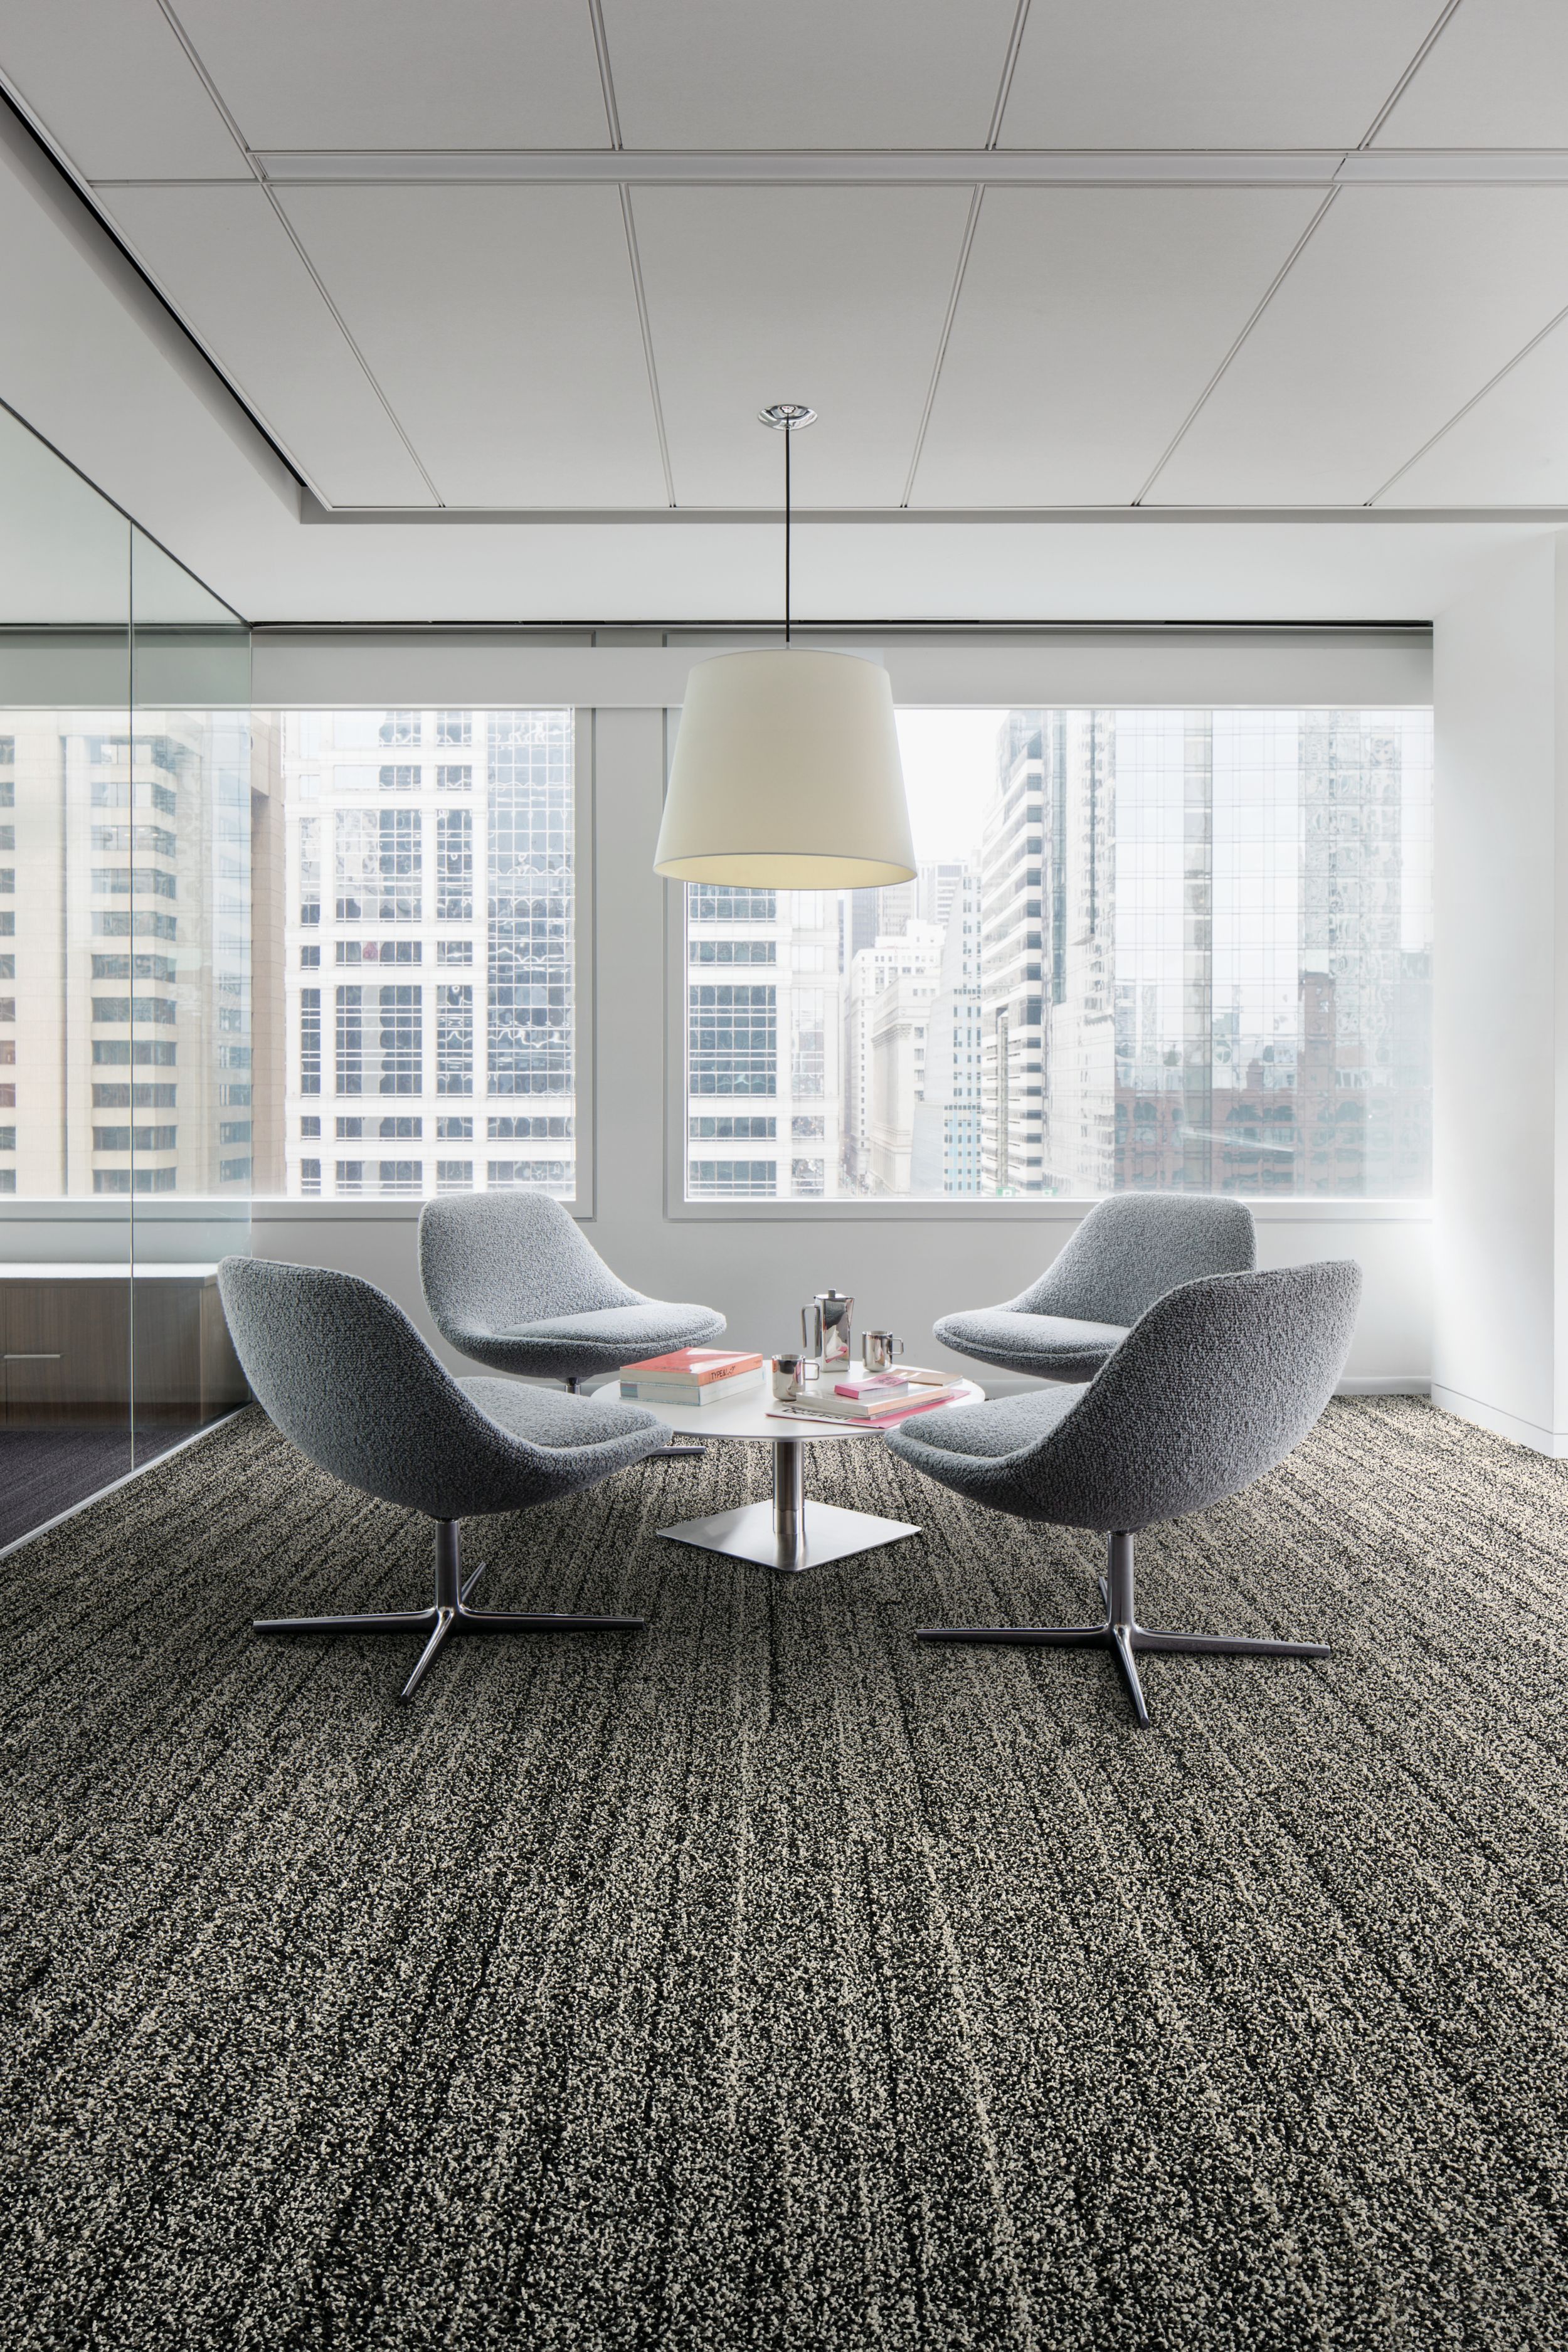 Interface Overedge plank carpet tile with fabric chairs around round table image number 2